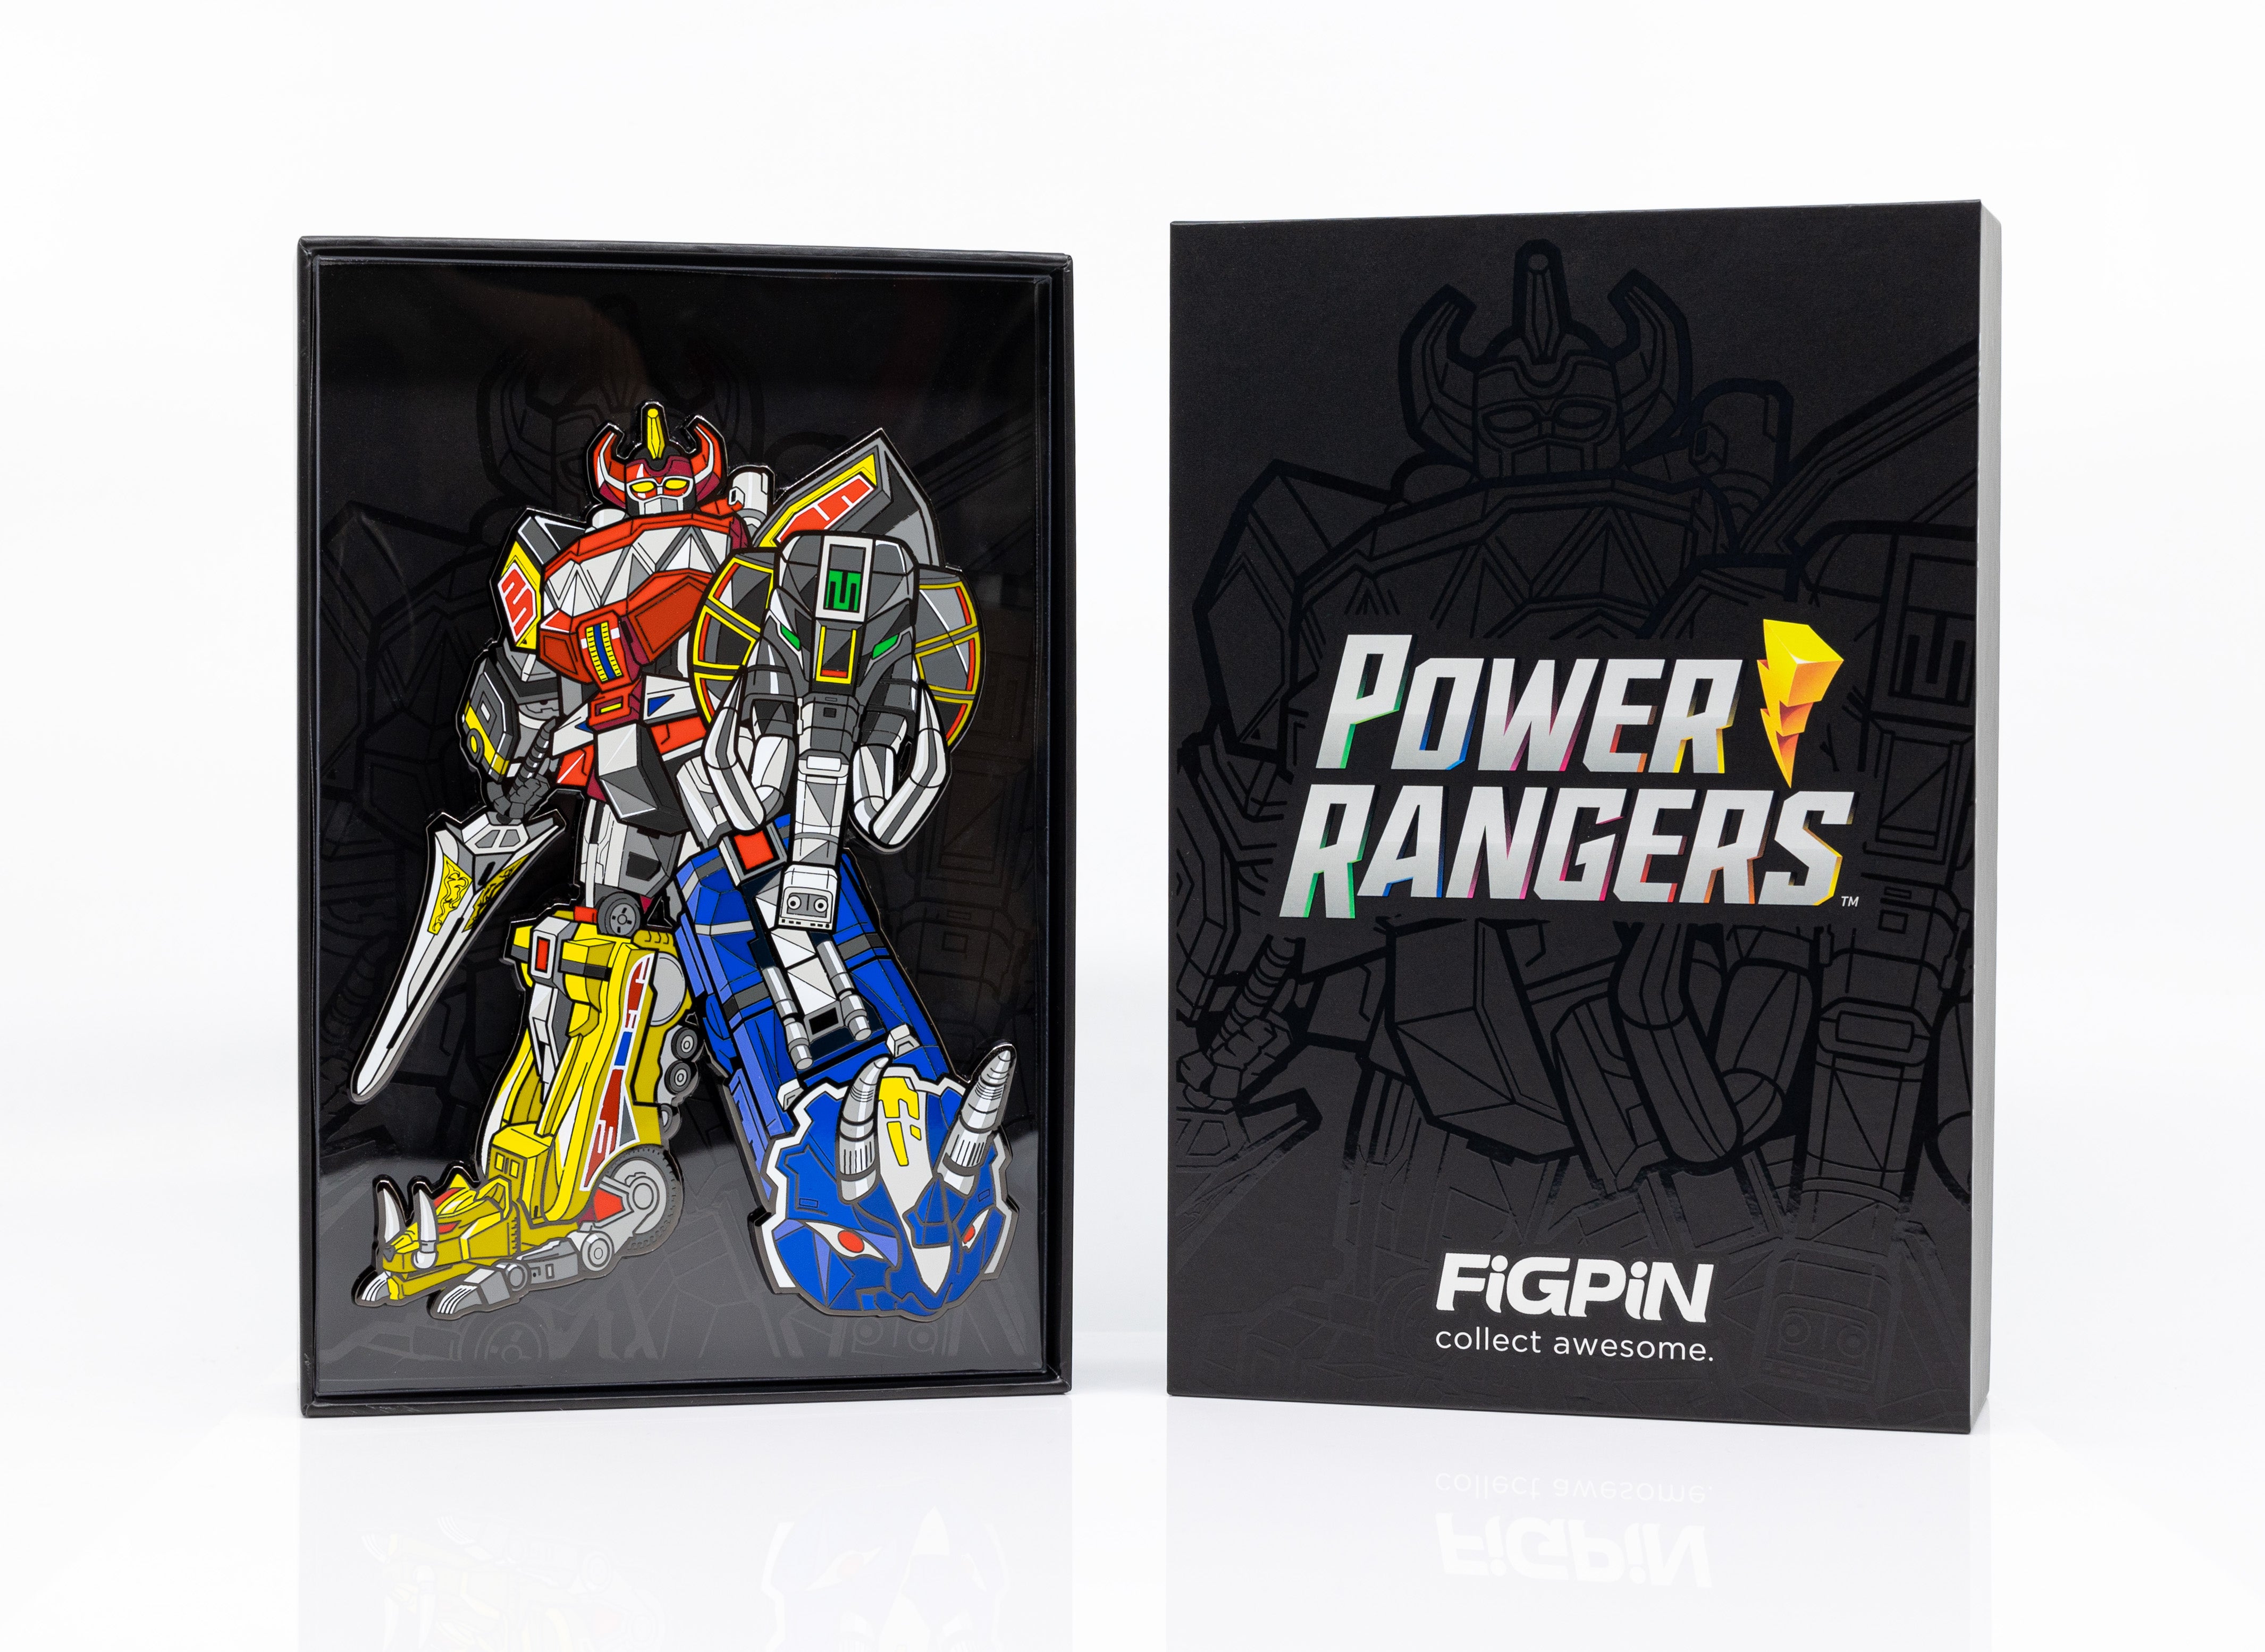 Power Rangers Megazord FiGPiN XL inside box side by side of the top lid with "Power Rangers - FiGPiN Collect Awesome" on the front